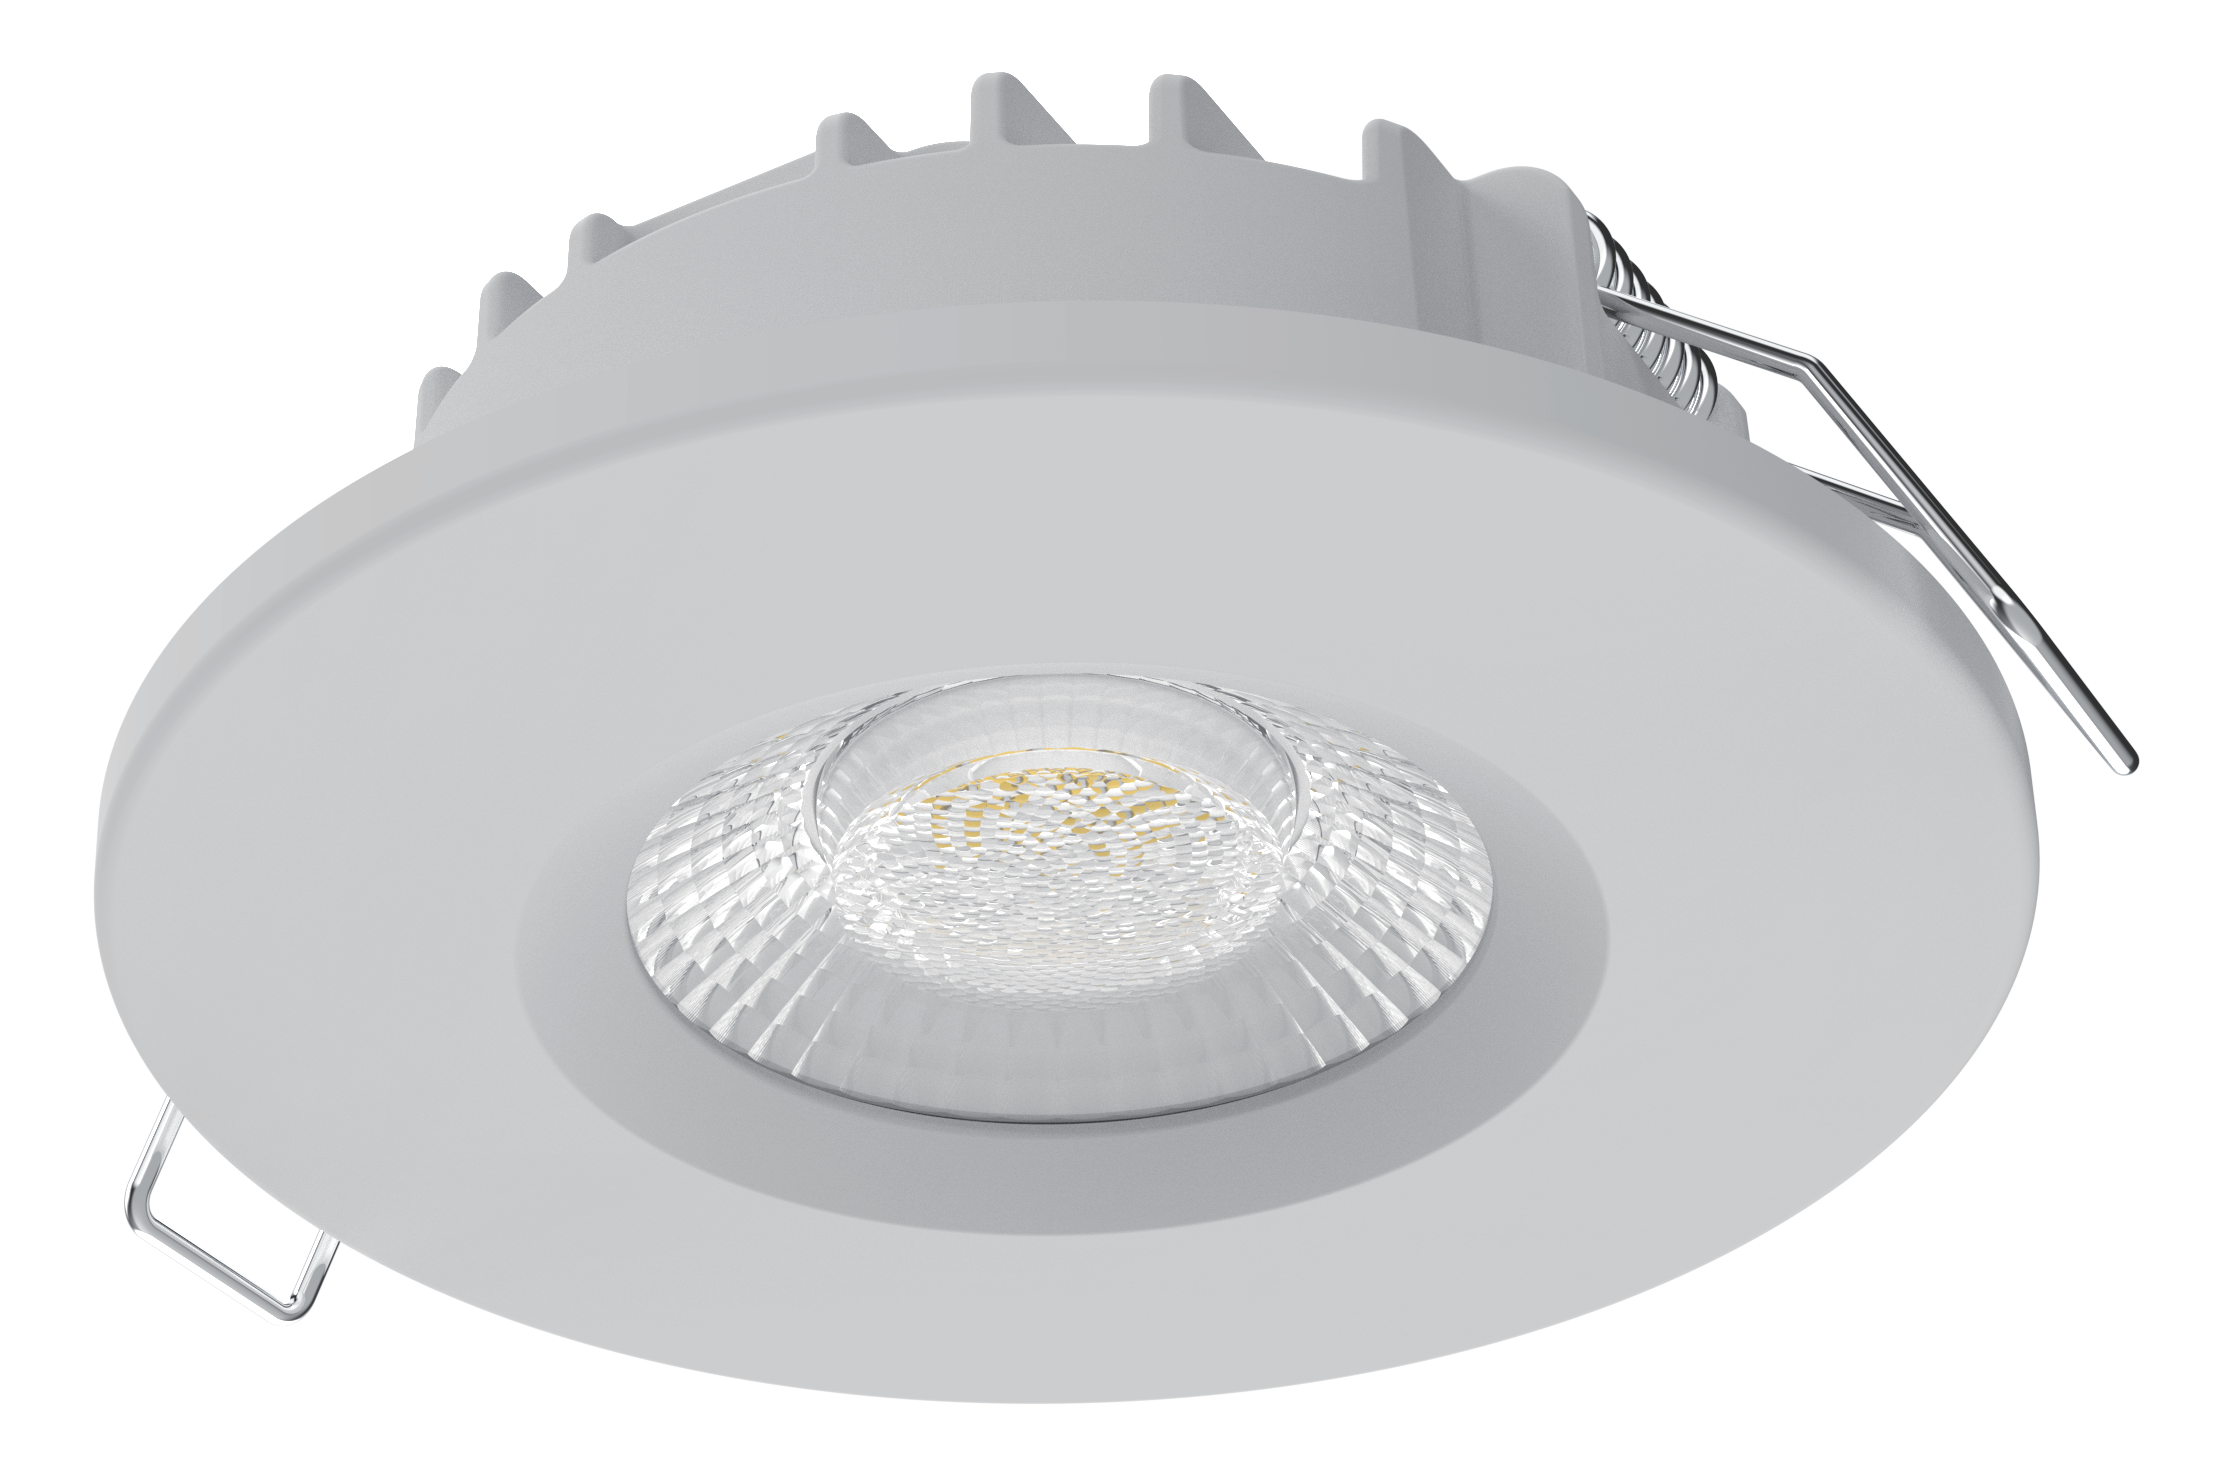 Hot Selling for Dimmable Led Ip44 Downlight - 5W ultra slim LED downlight Rize 5RS315 – Radiant Lighting